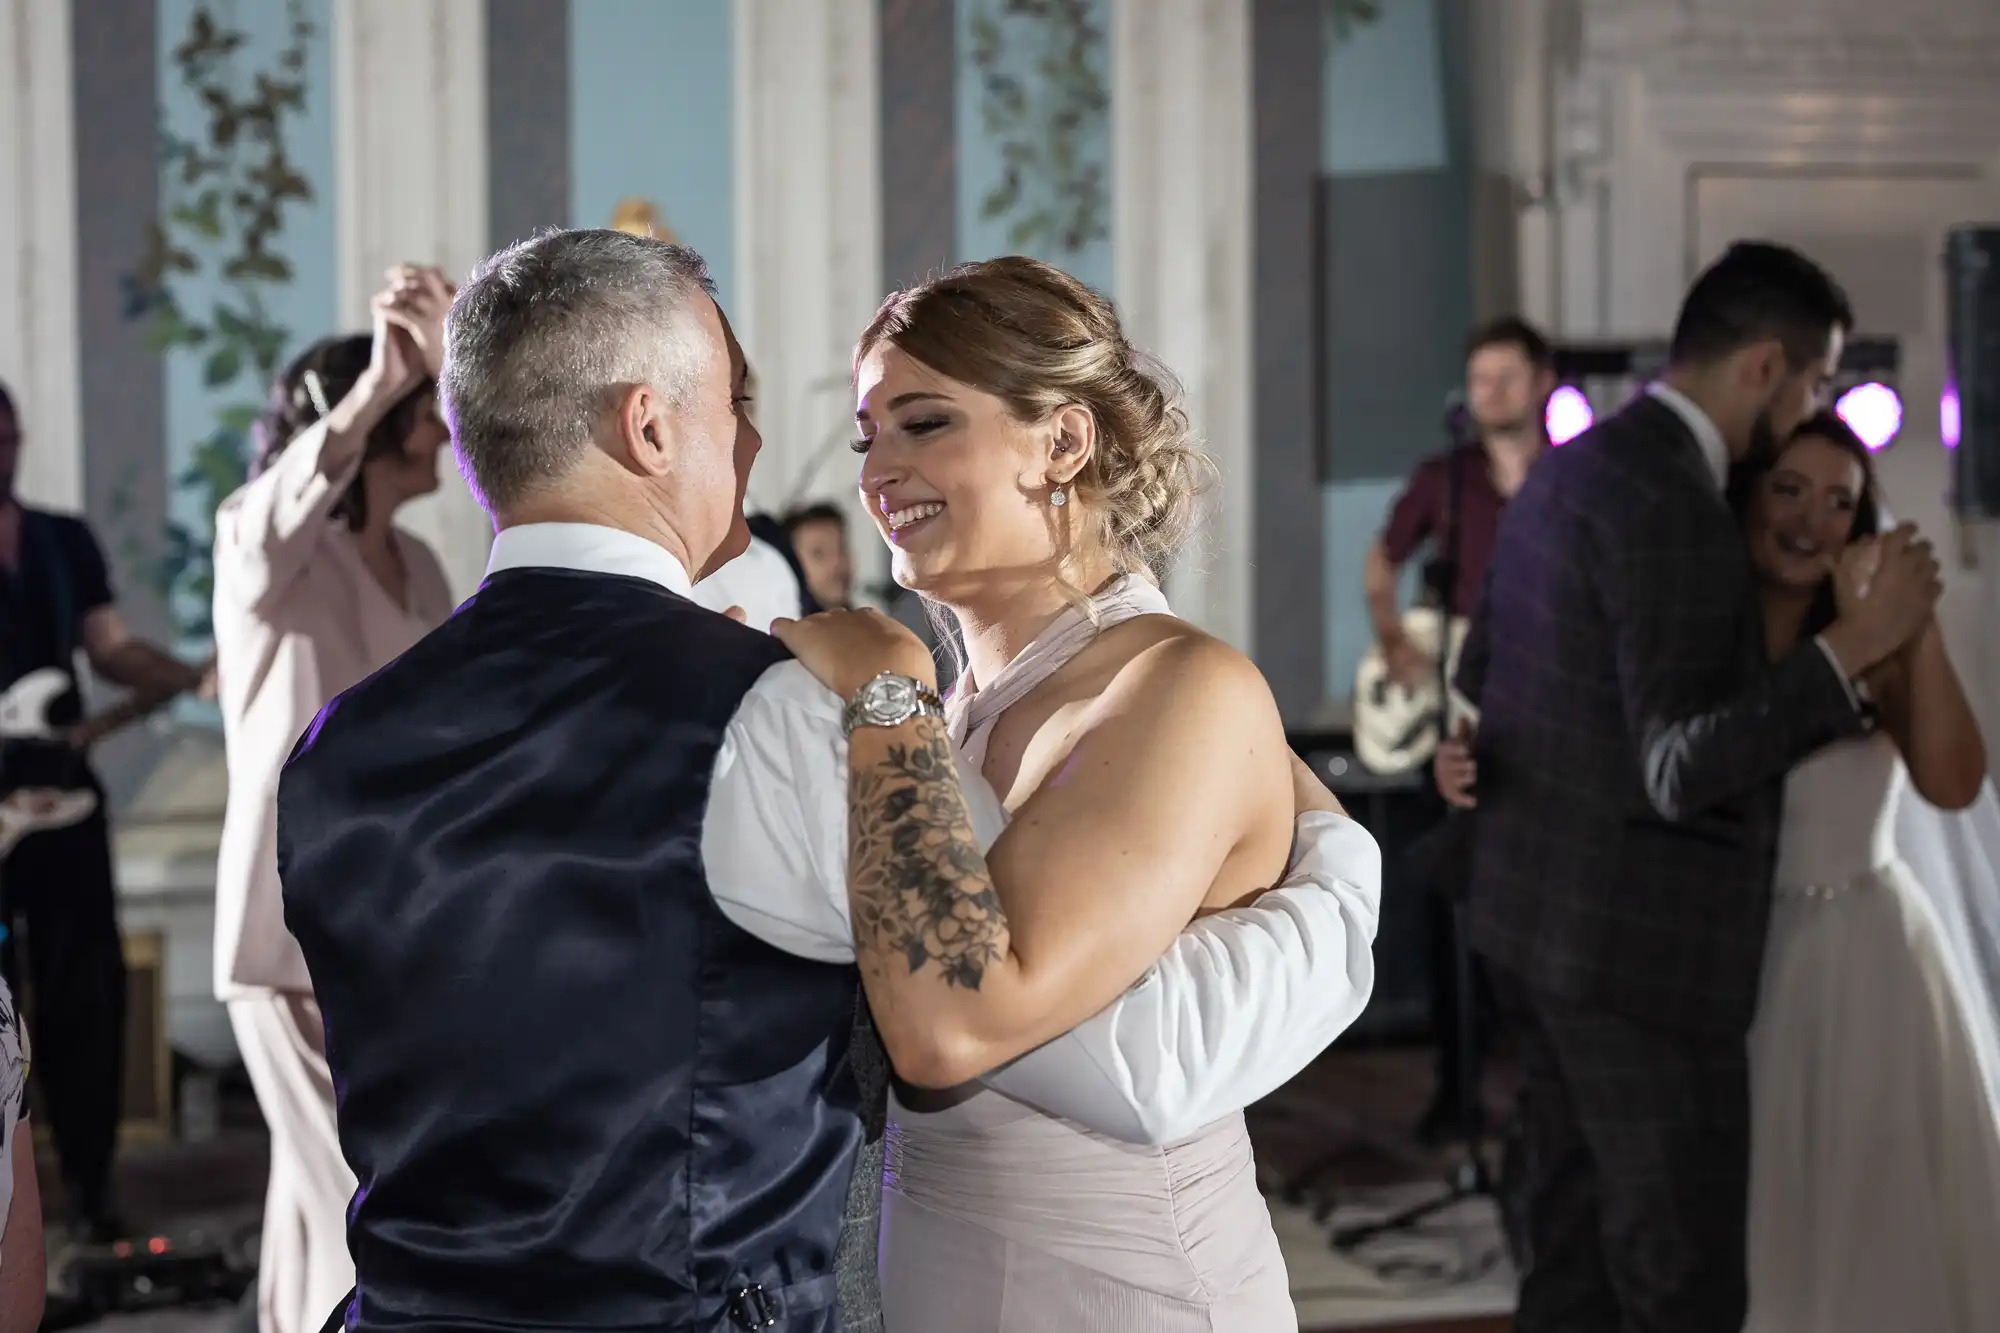 A bridesmaid and her partner share a warm, smiling dance at a wedding reception, surrounded by dancing guests in an elegantly lit hall.